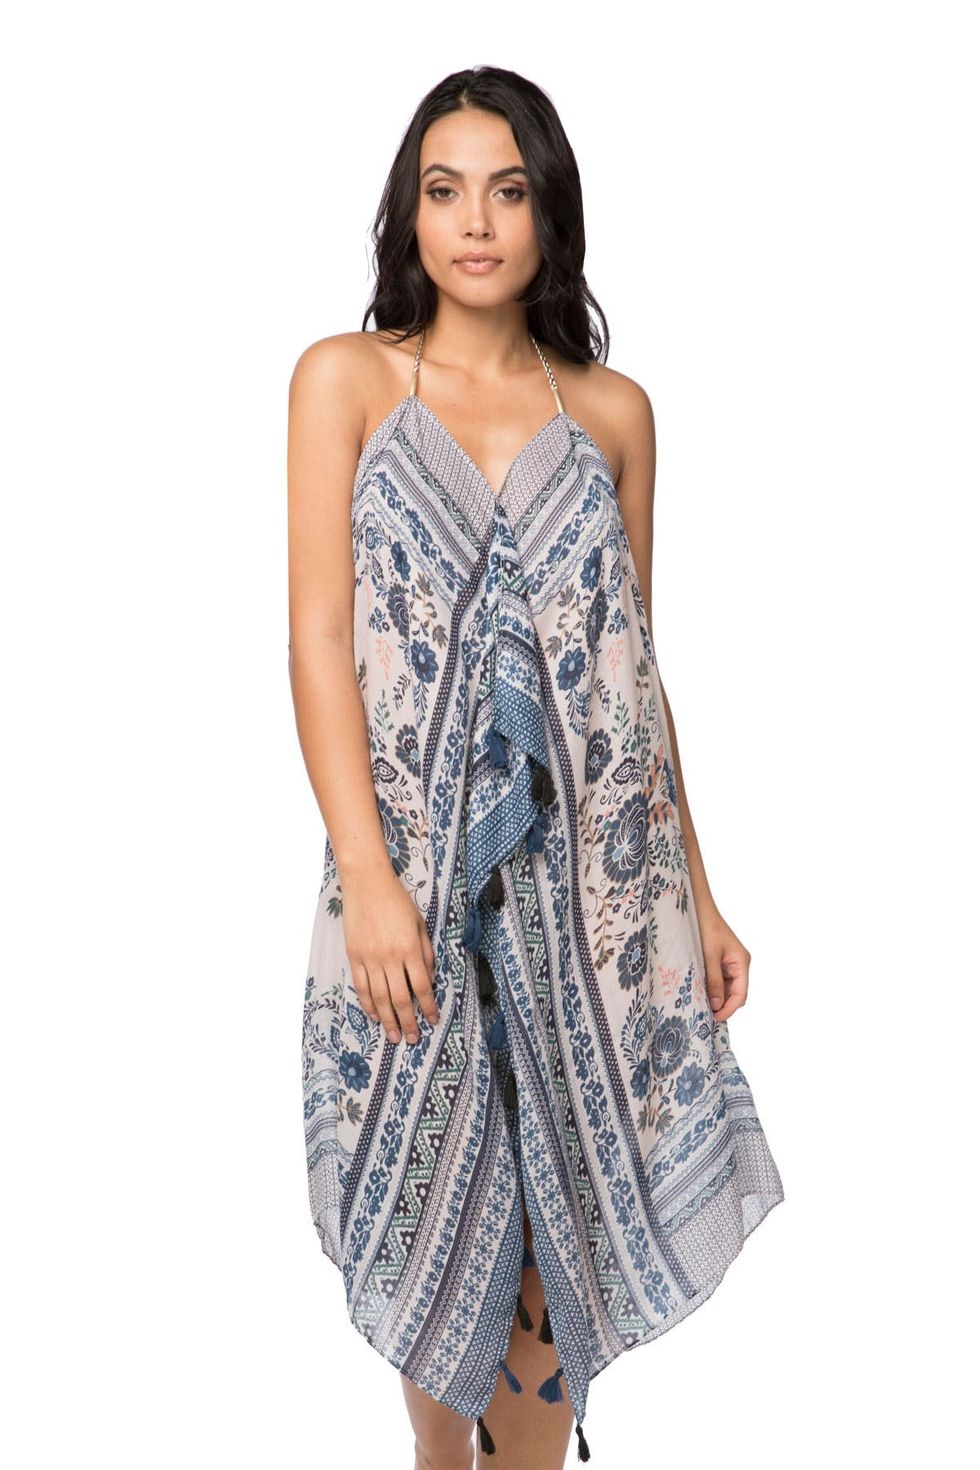 15 Swimsuit Cover Ups to Live in During Spring Break - Brit + Co